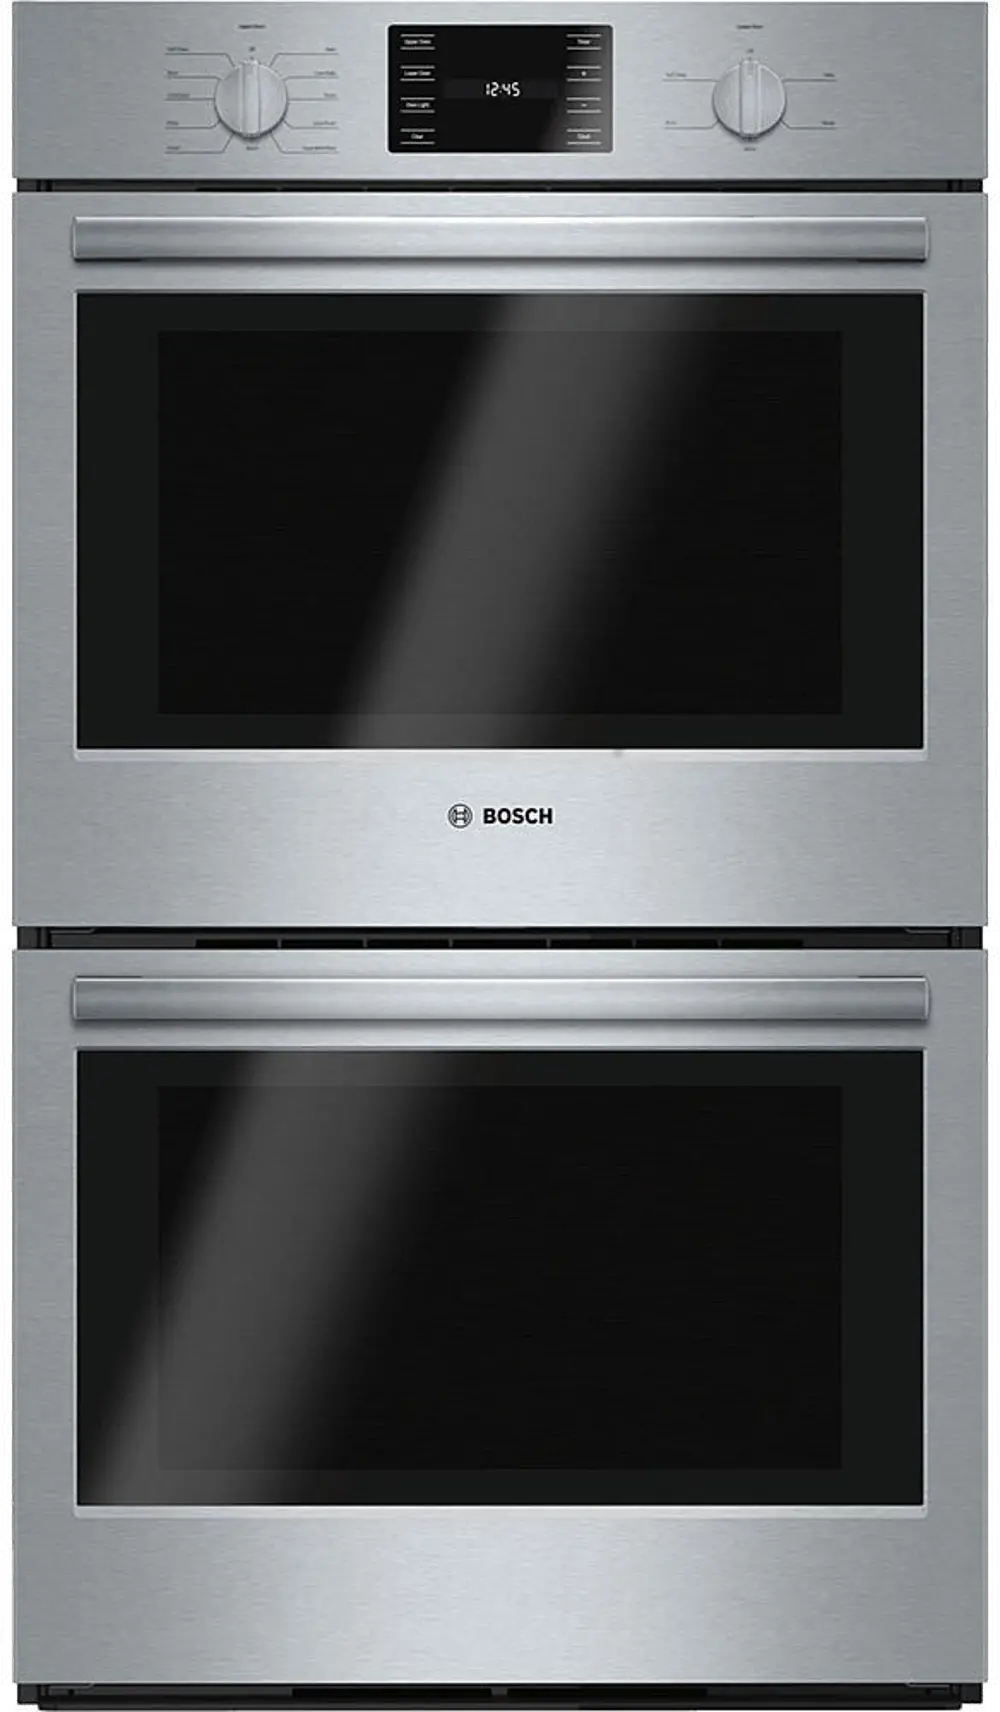 HBLP651UC Bosch 9.2 cu ft Double Wall Oven - Stainless Steel 30 Inch-1